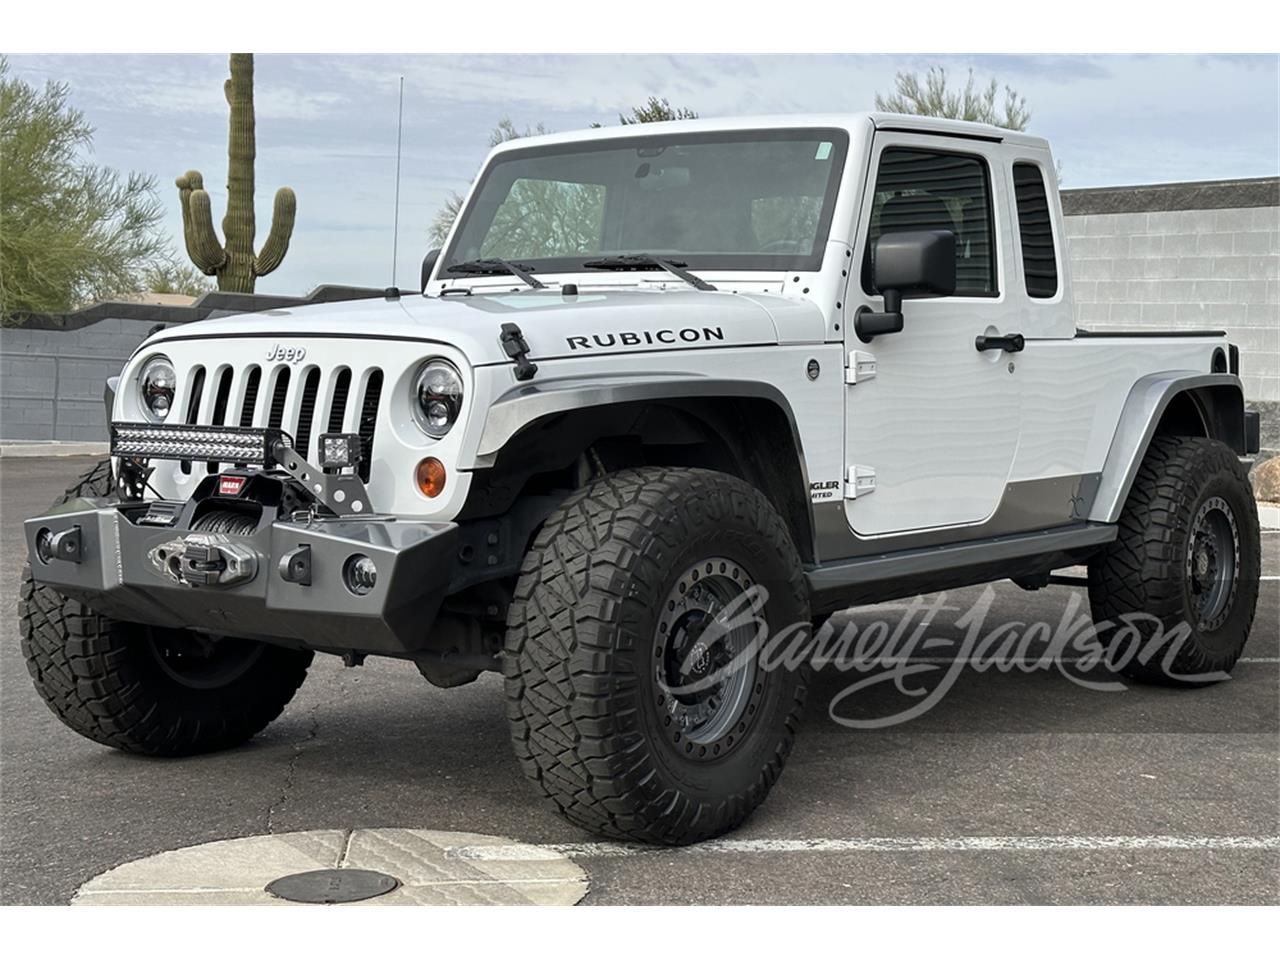 For Sale at Auction: 2012 Jeep Wrangler Rubicon in Scottsdale, Arizona for sale in Scottsdale, AZ